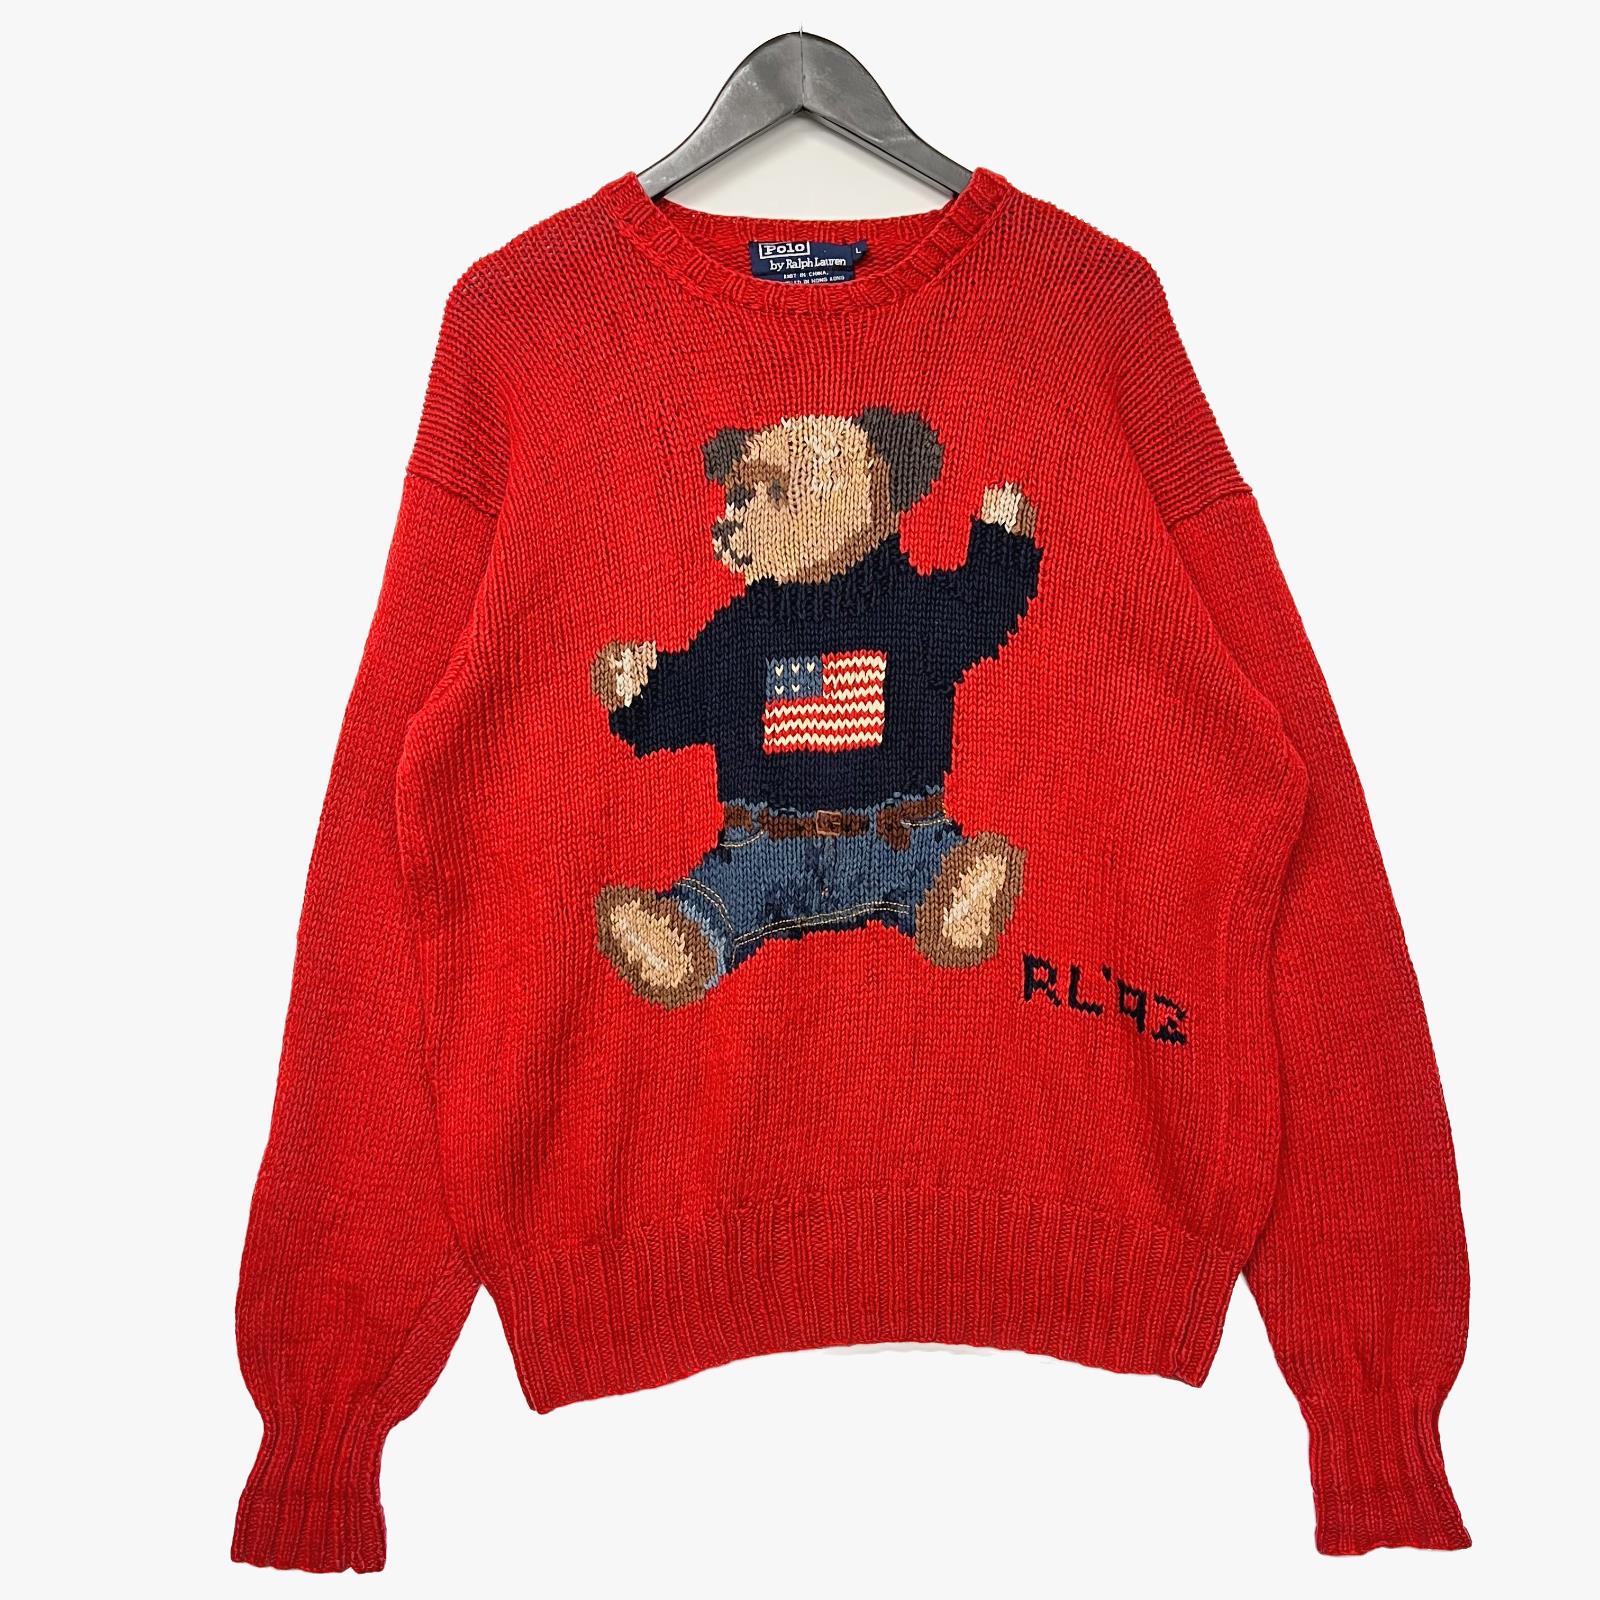 Vintage Polo Ralph Lauren Pull Over Knit Red Size L Big 90s Sitting Polo Bear